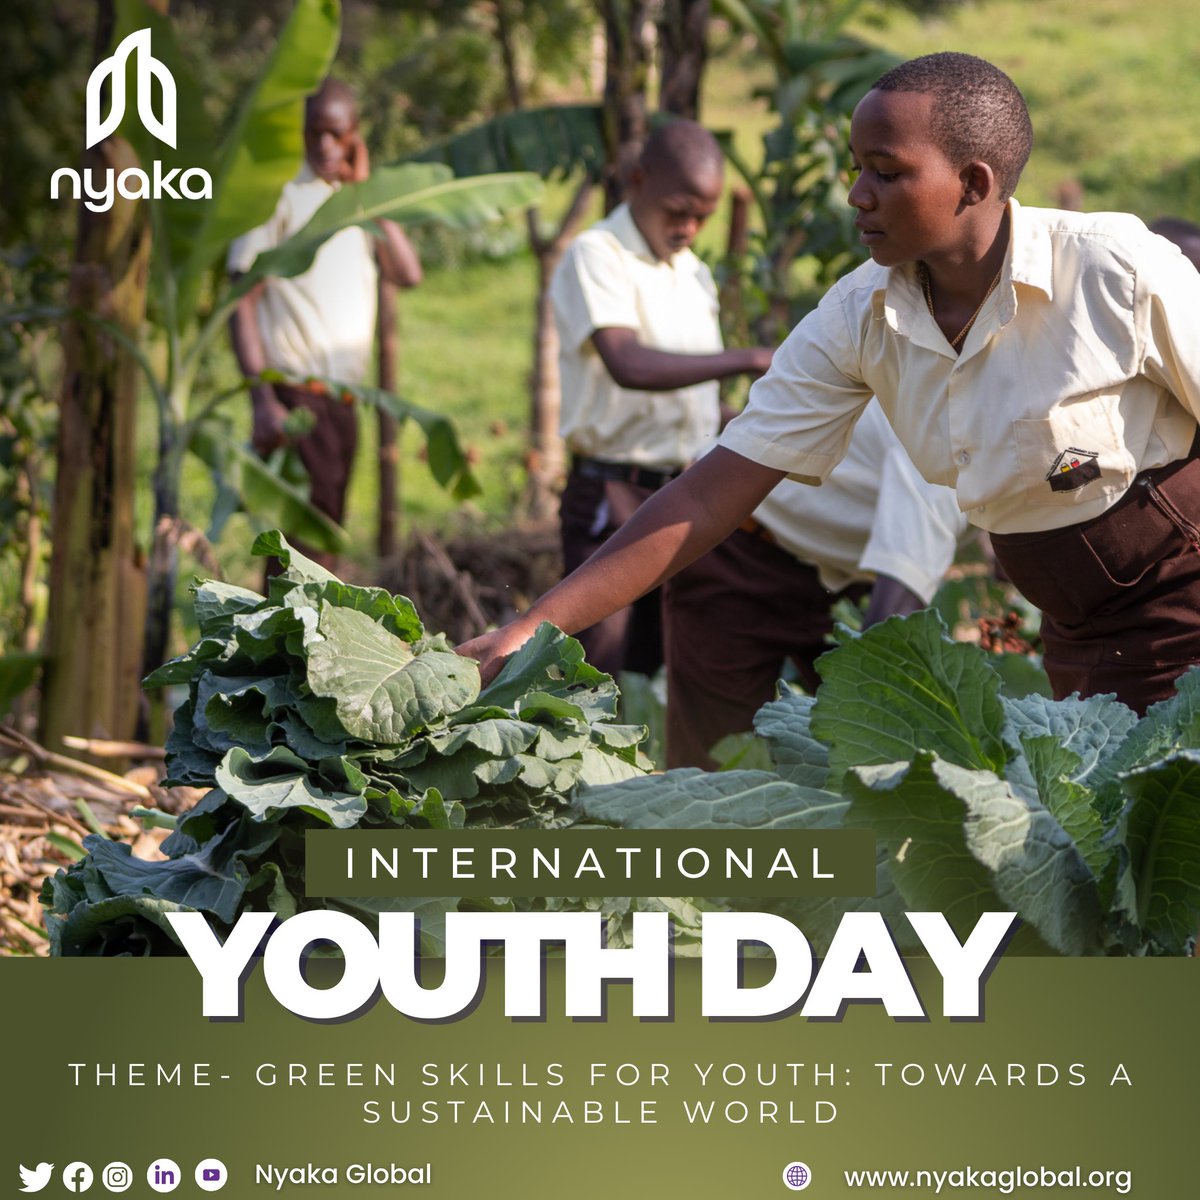 Nyaka joins the world in celebrating International Youth Day!
 
We're proud to empower our youth with essential skills that enrich their lives and contribute to a more sustainable world.

#InternationalYouthDay23 #YouthDay2023
#NyakaLearners